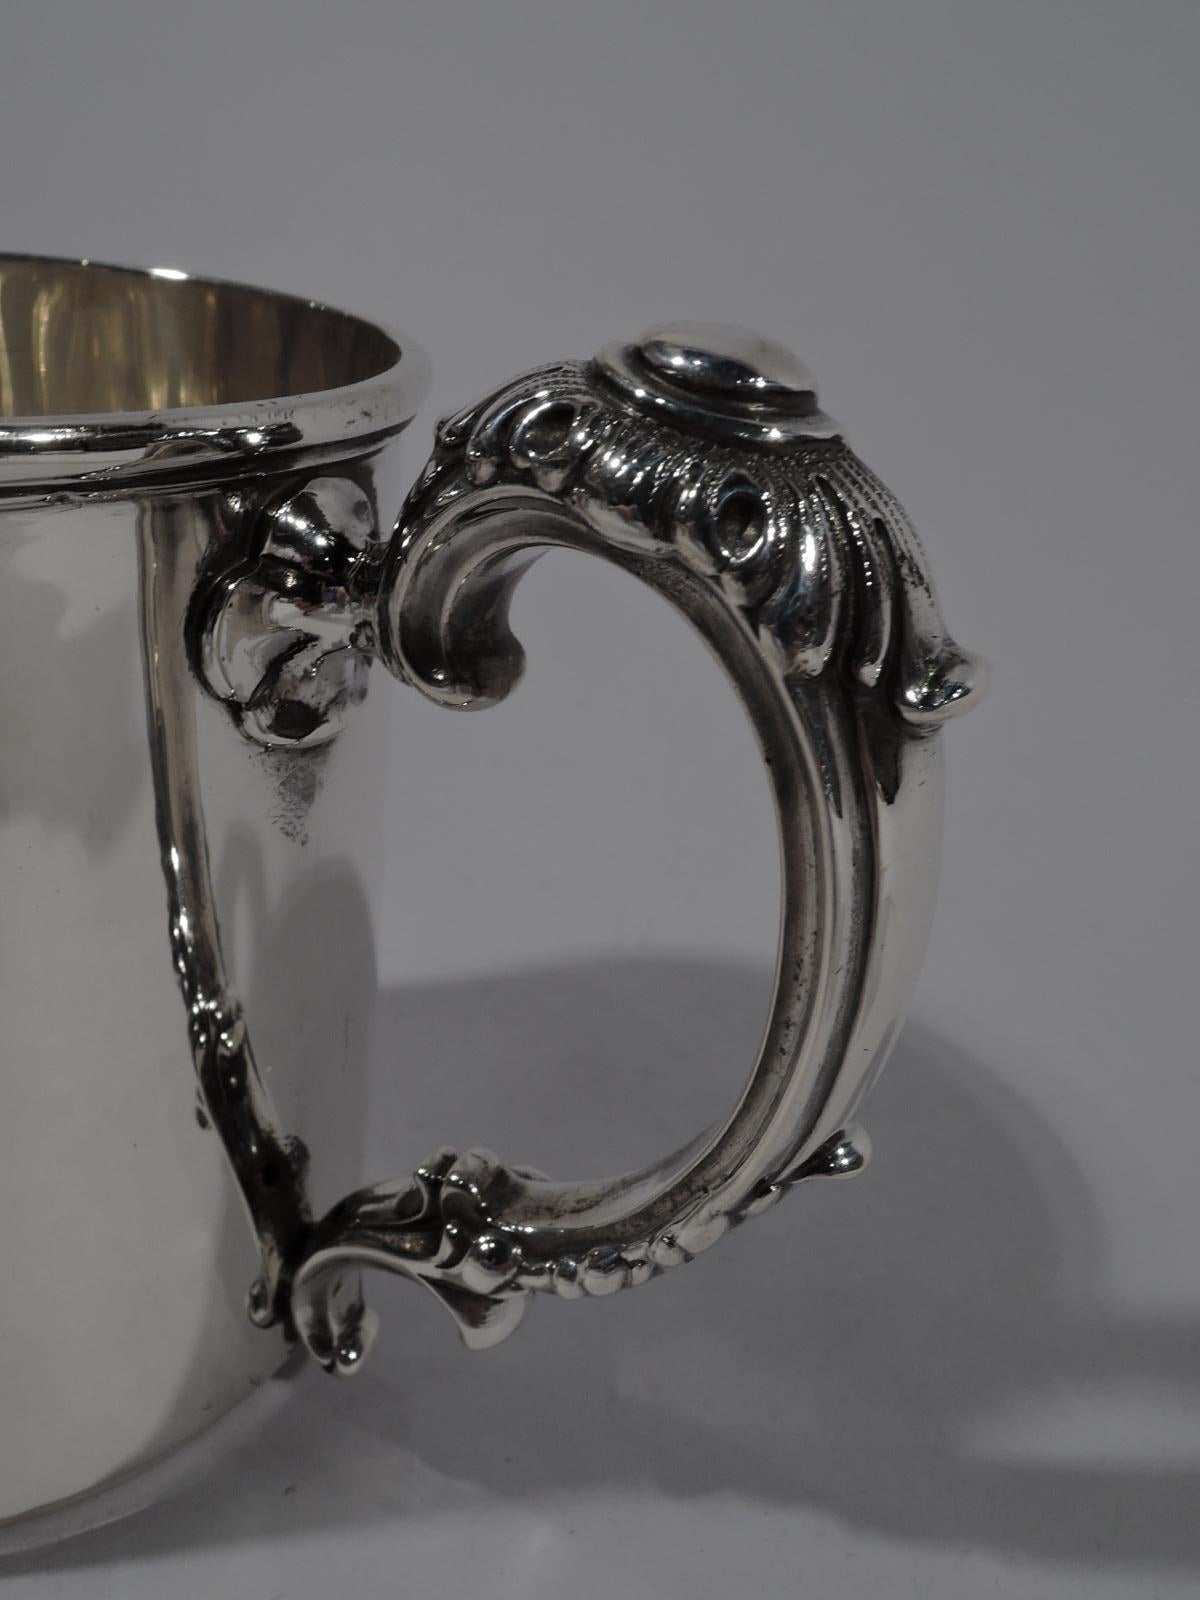 Turn-of-the-century American sterling silver baby cup. Straight sides and short inset foot. Rim molded with pendant fleurs-de-lys. Restrained ornament and lots of room for engraving with the fancy bits confined to the high-looping, double-scroll,